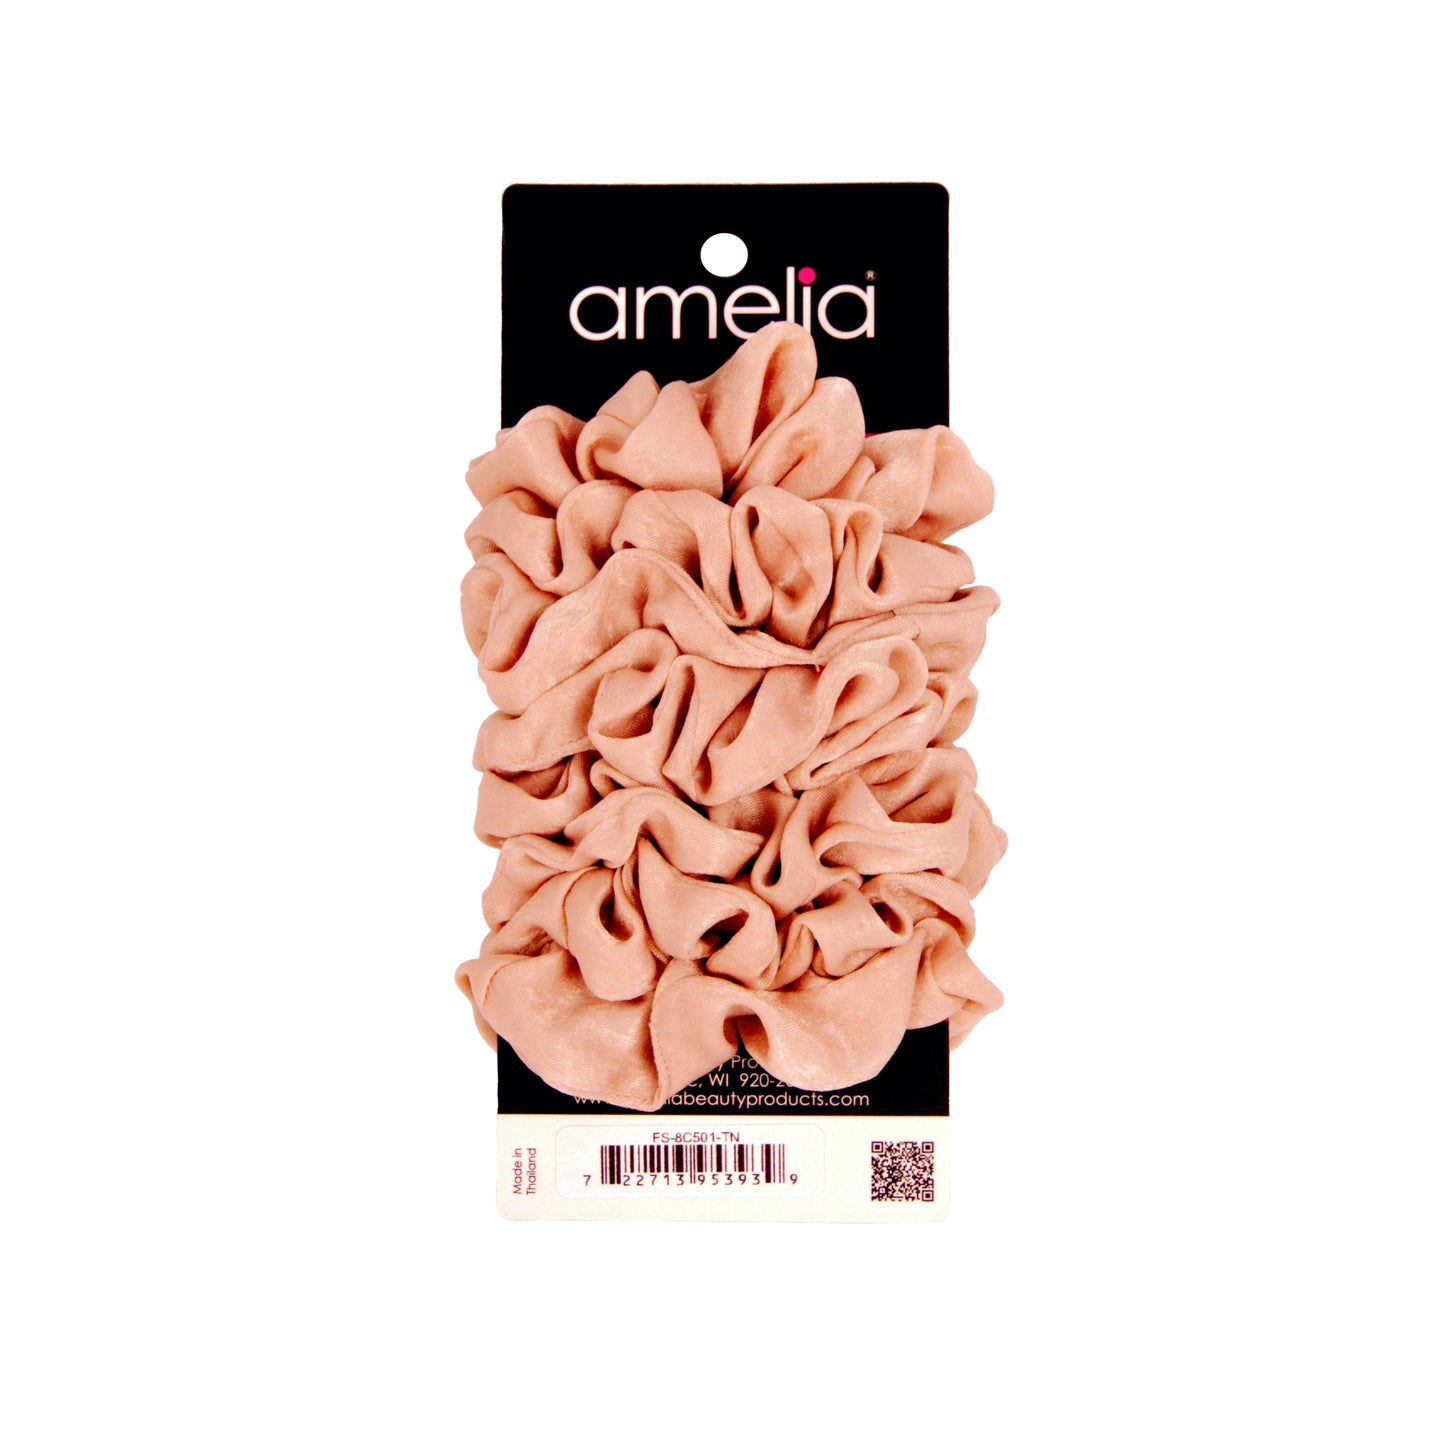 Amelia Beauty | 3in Tan Crepe Scrunchies | Soft, Gentle and Strong Hold | No Snag, No Dents or Creases | 8 Pack